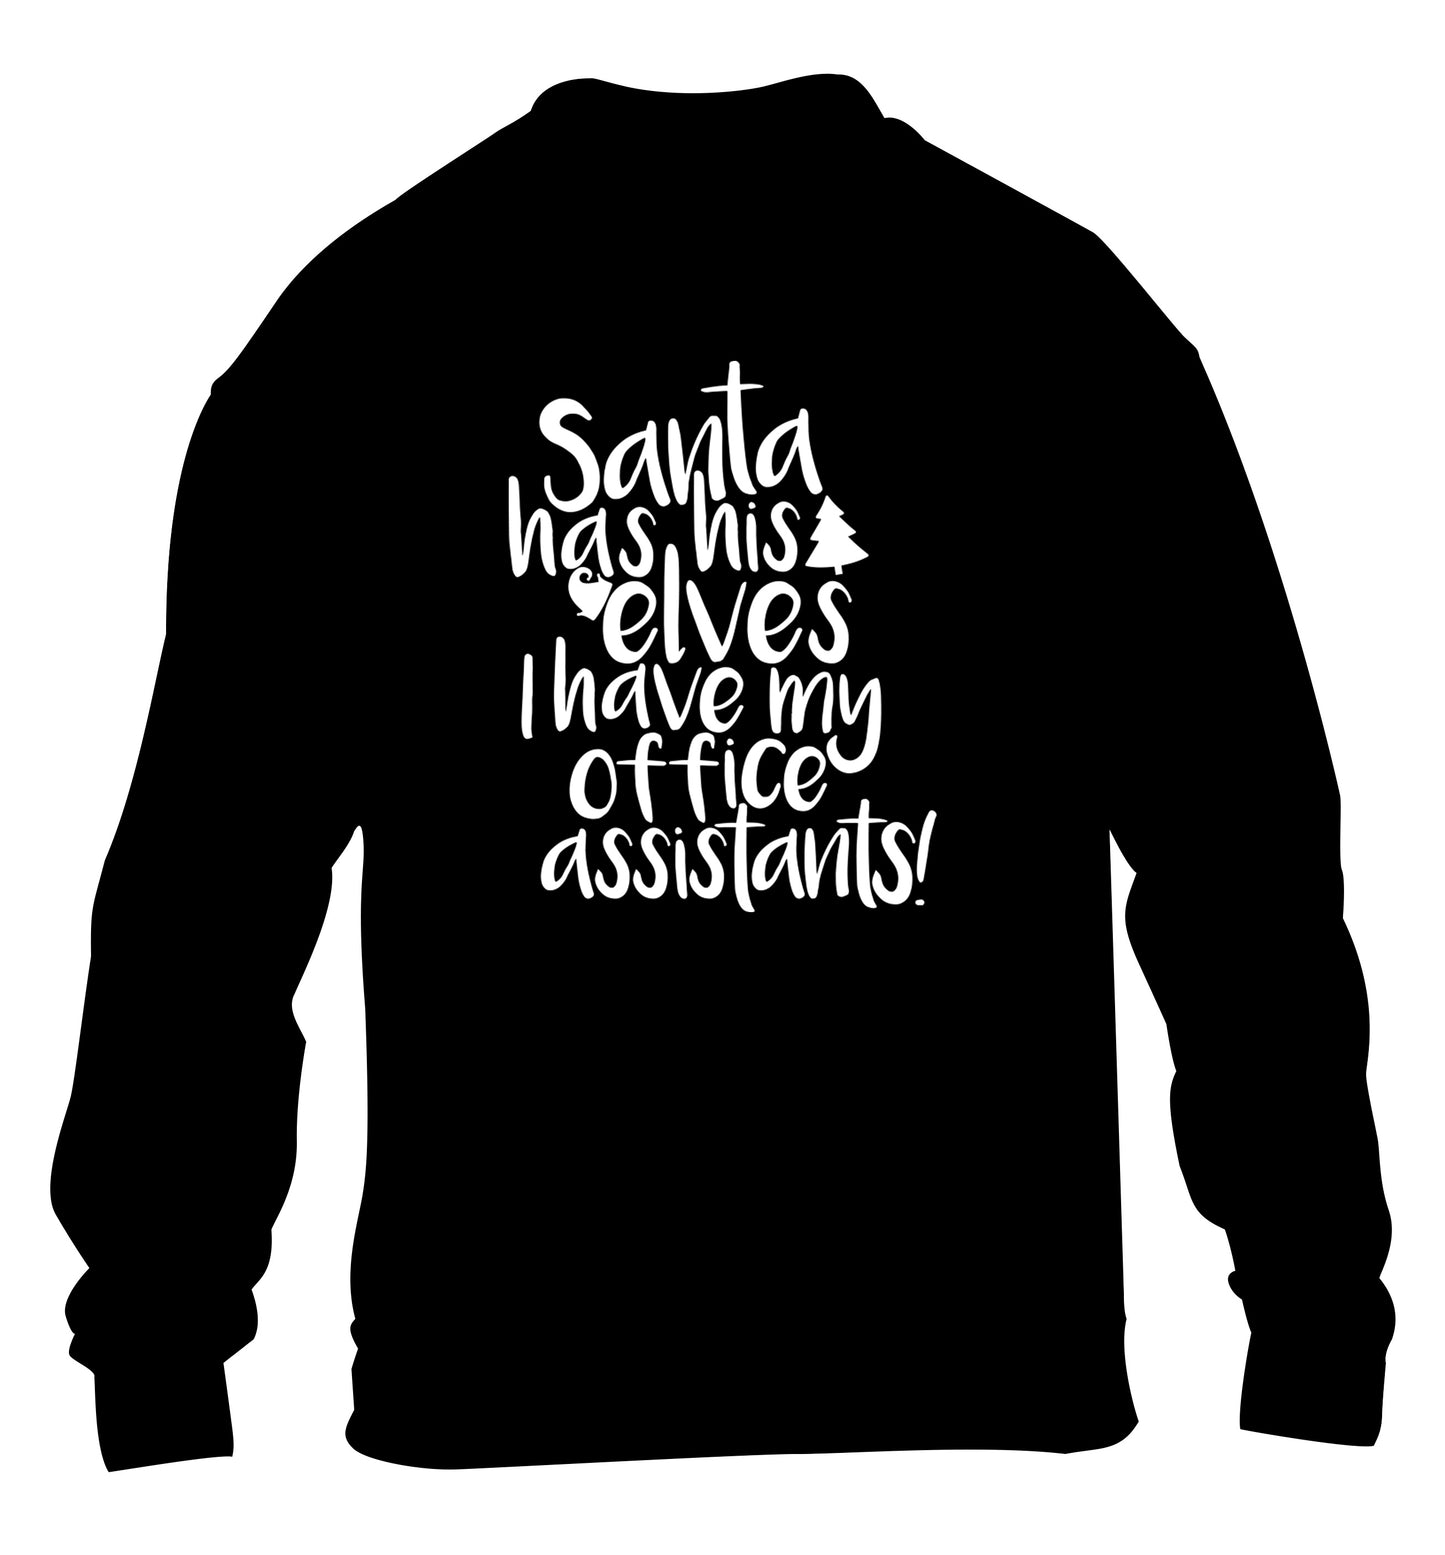 Santa has his elves I have my office assistants children's black sweater 12-14 Years